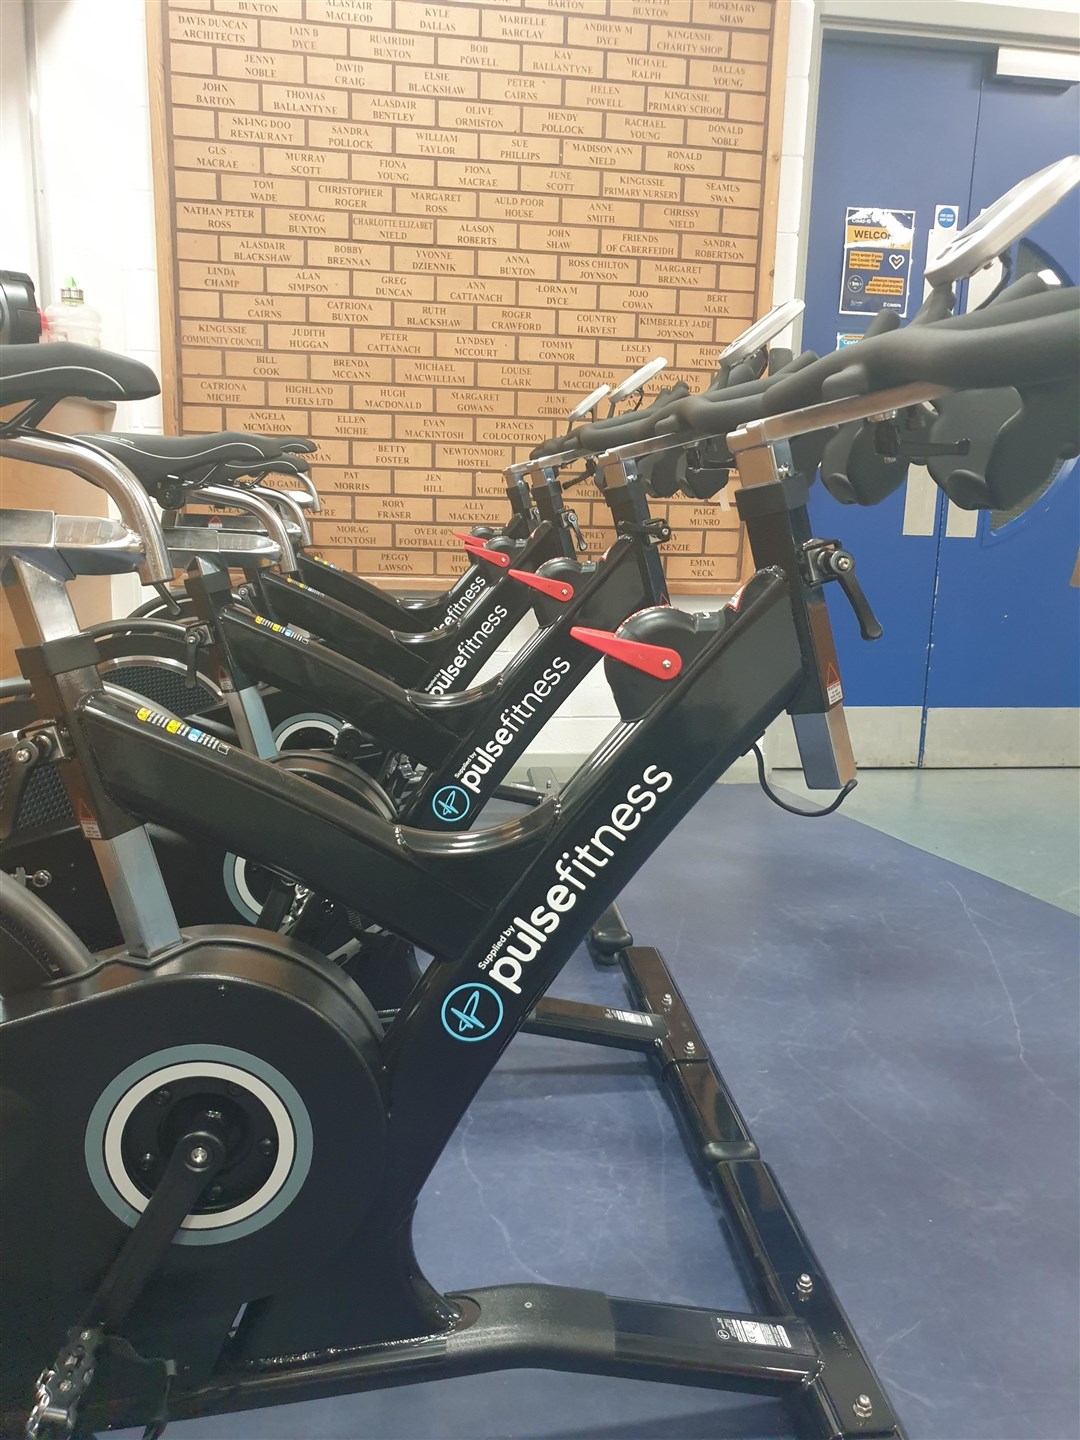 The state-of-the art spinning bikes now in use at the Badenoch Leisure Centre.